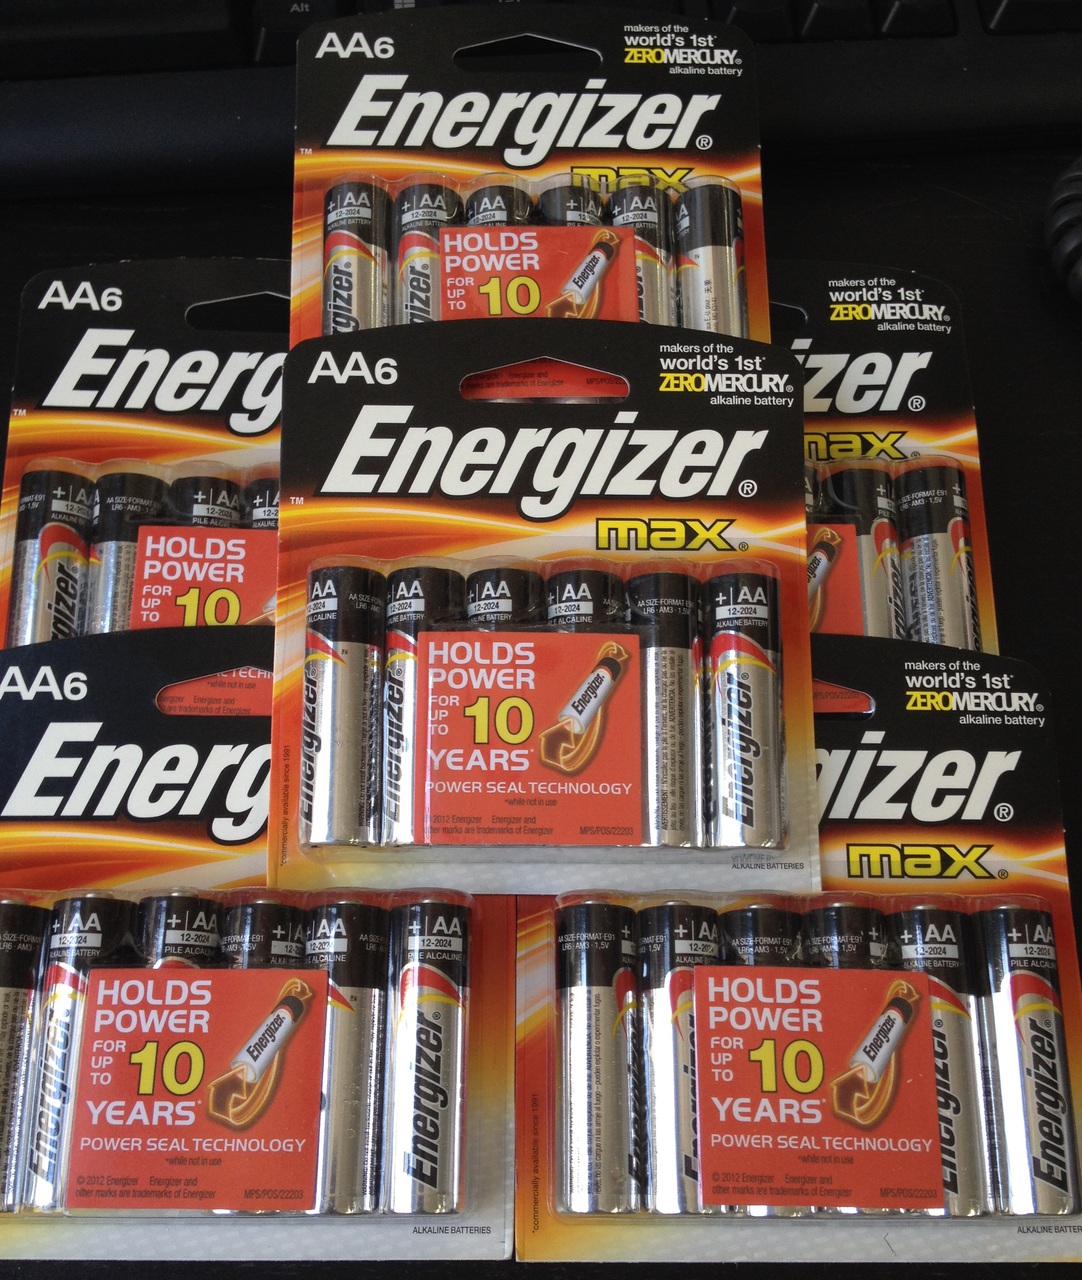 36 - Energizer MAX AA E91 1.5V Alkaline Batteries - 6 Retail Cards Of 6 + Free Shipping